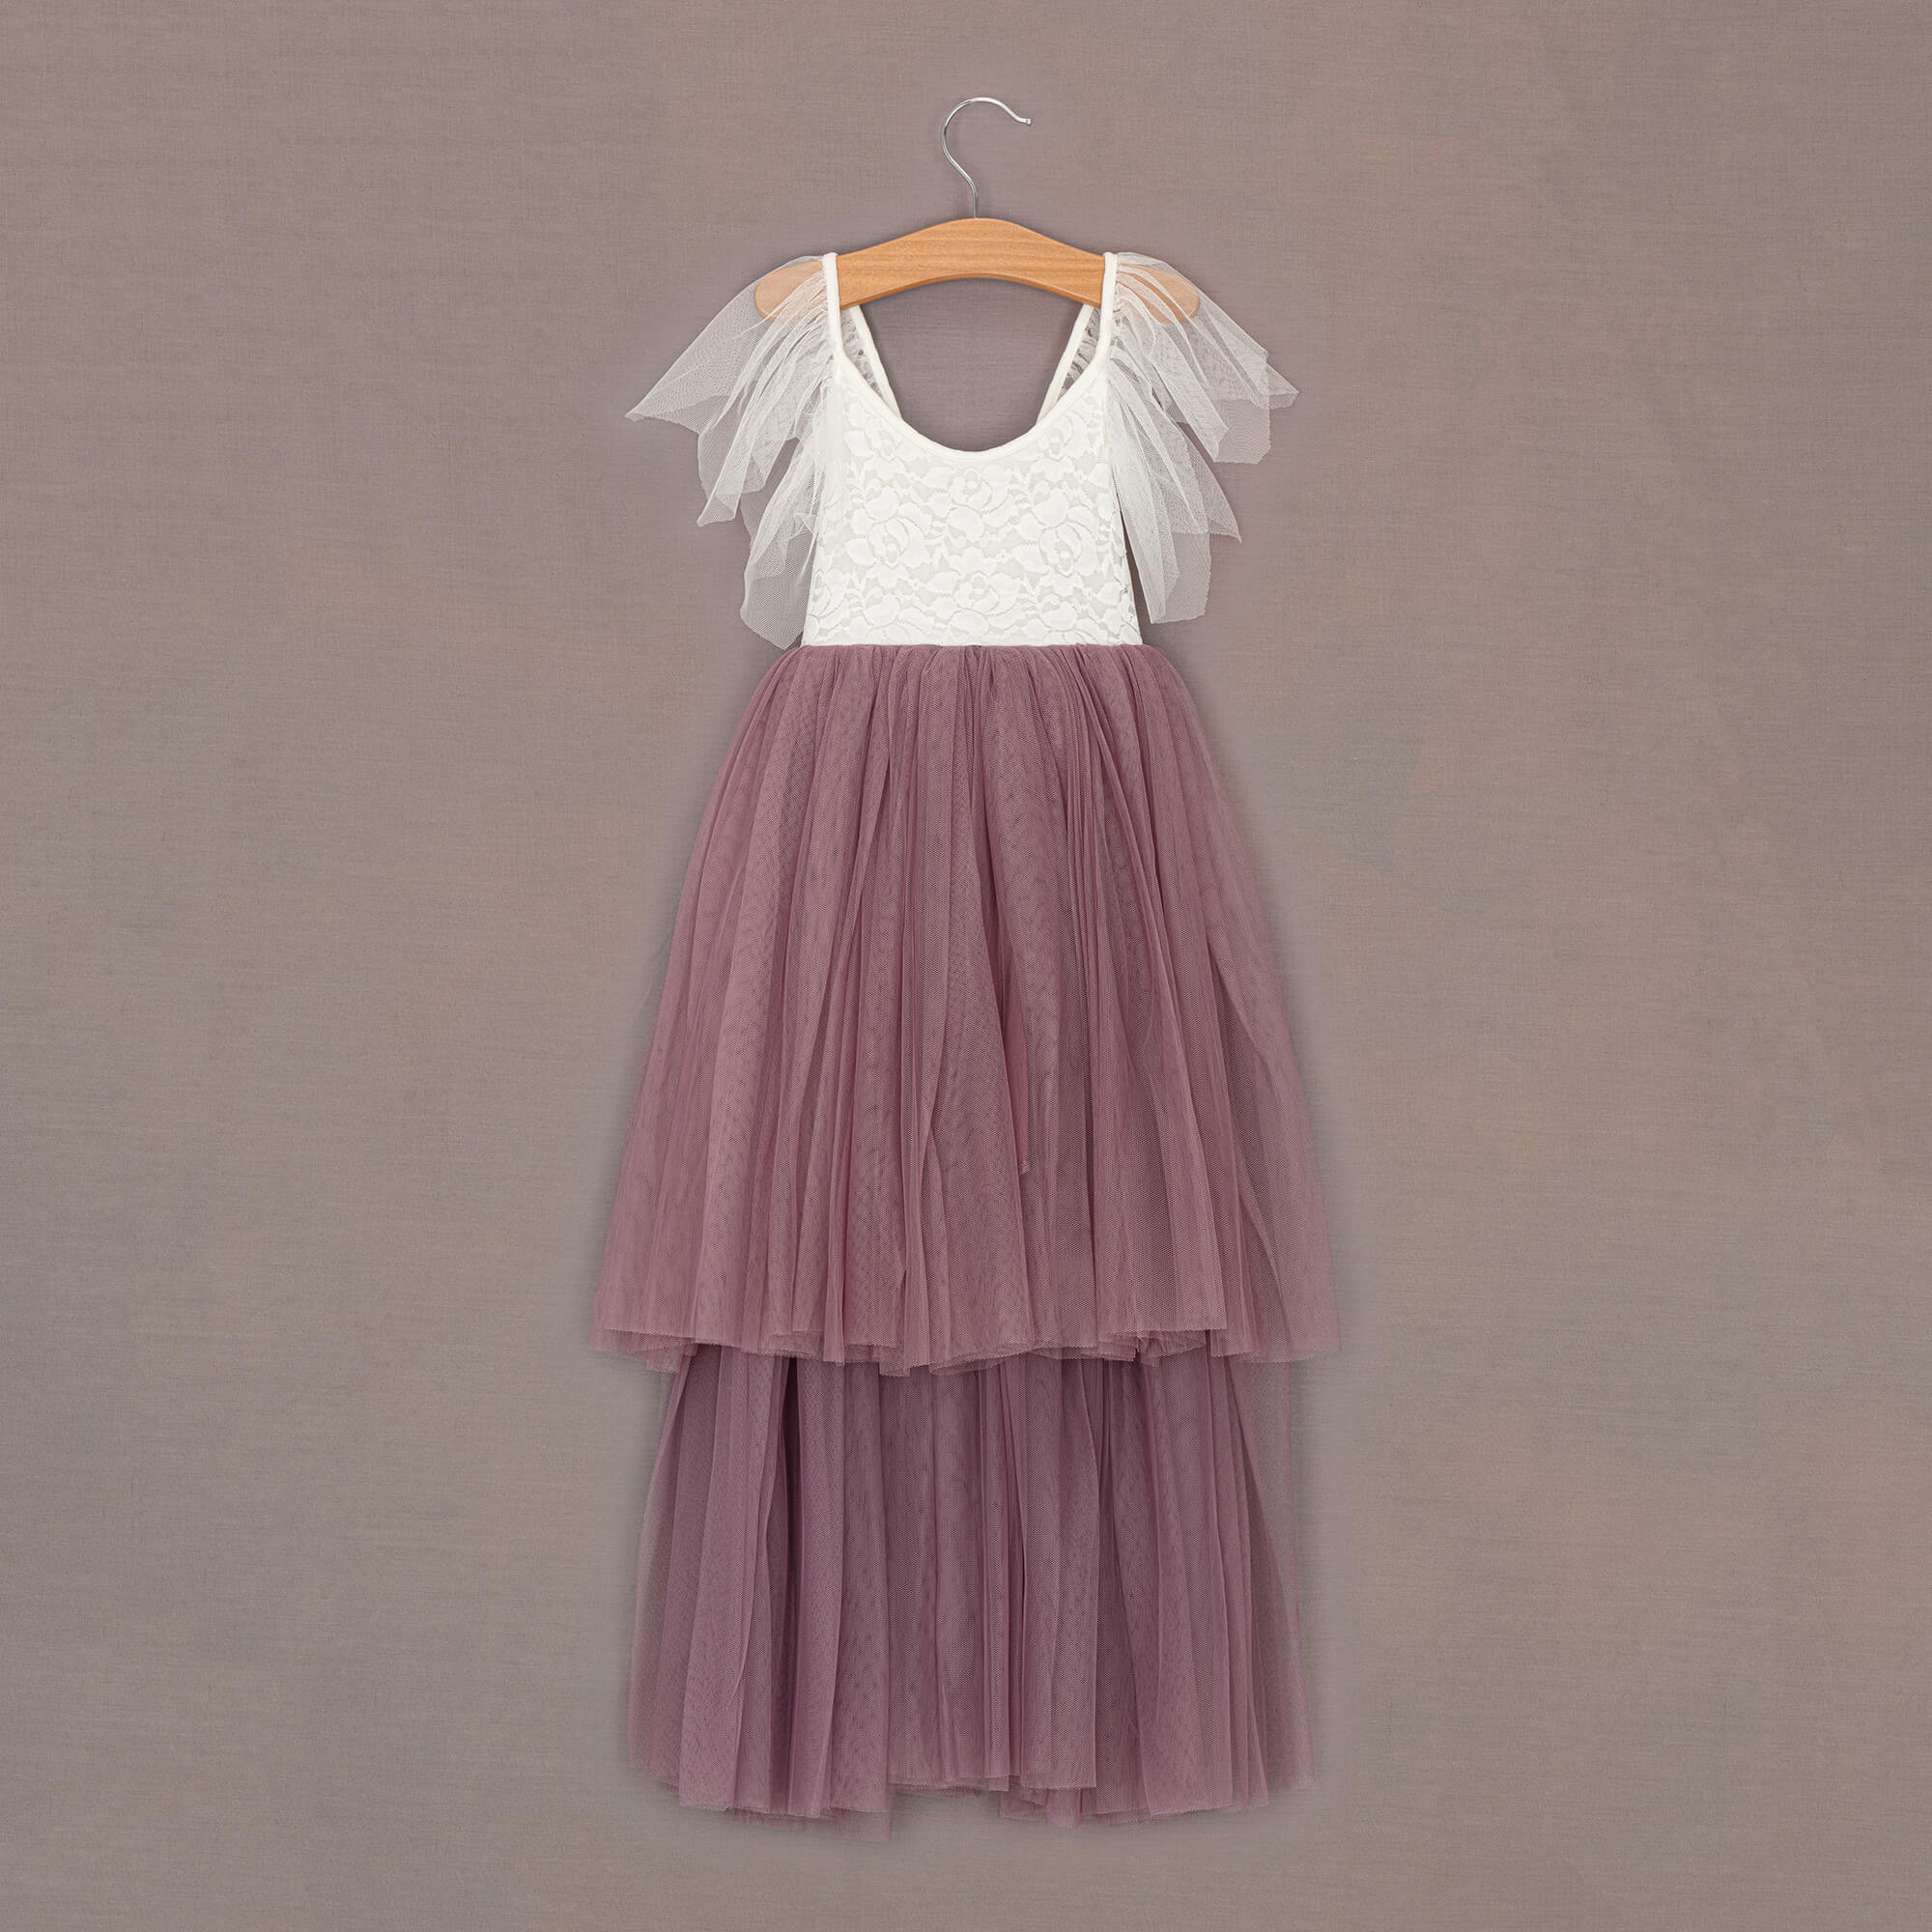 Heather tulle butterfly style dress